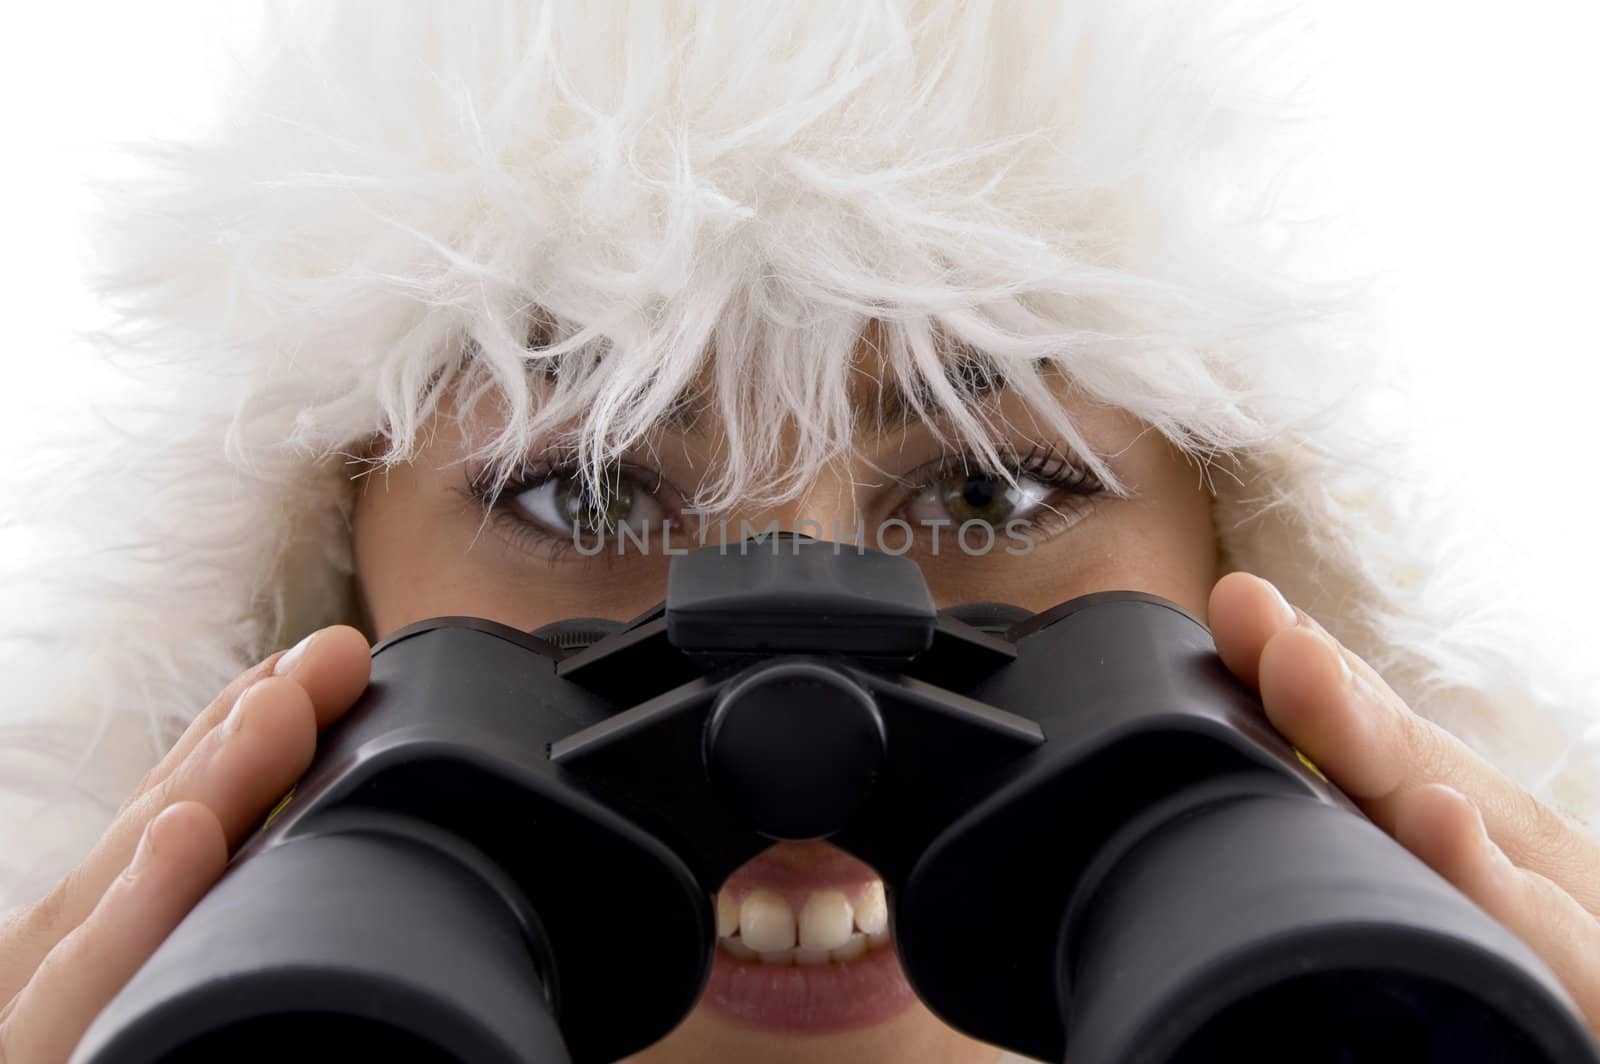 close up view of woman holding binocular by imagerymajestic